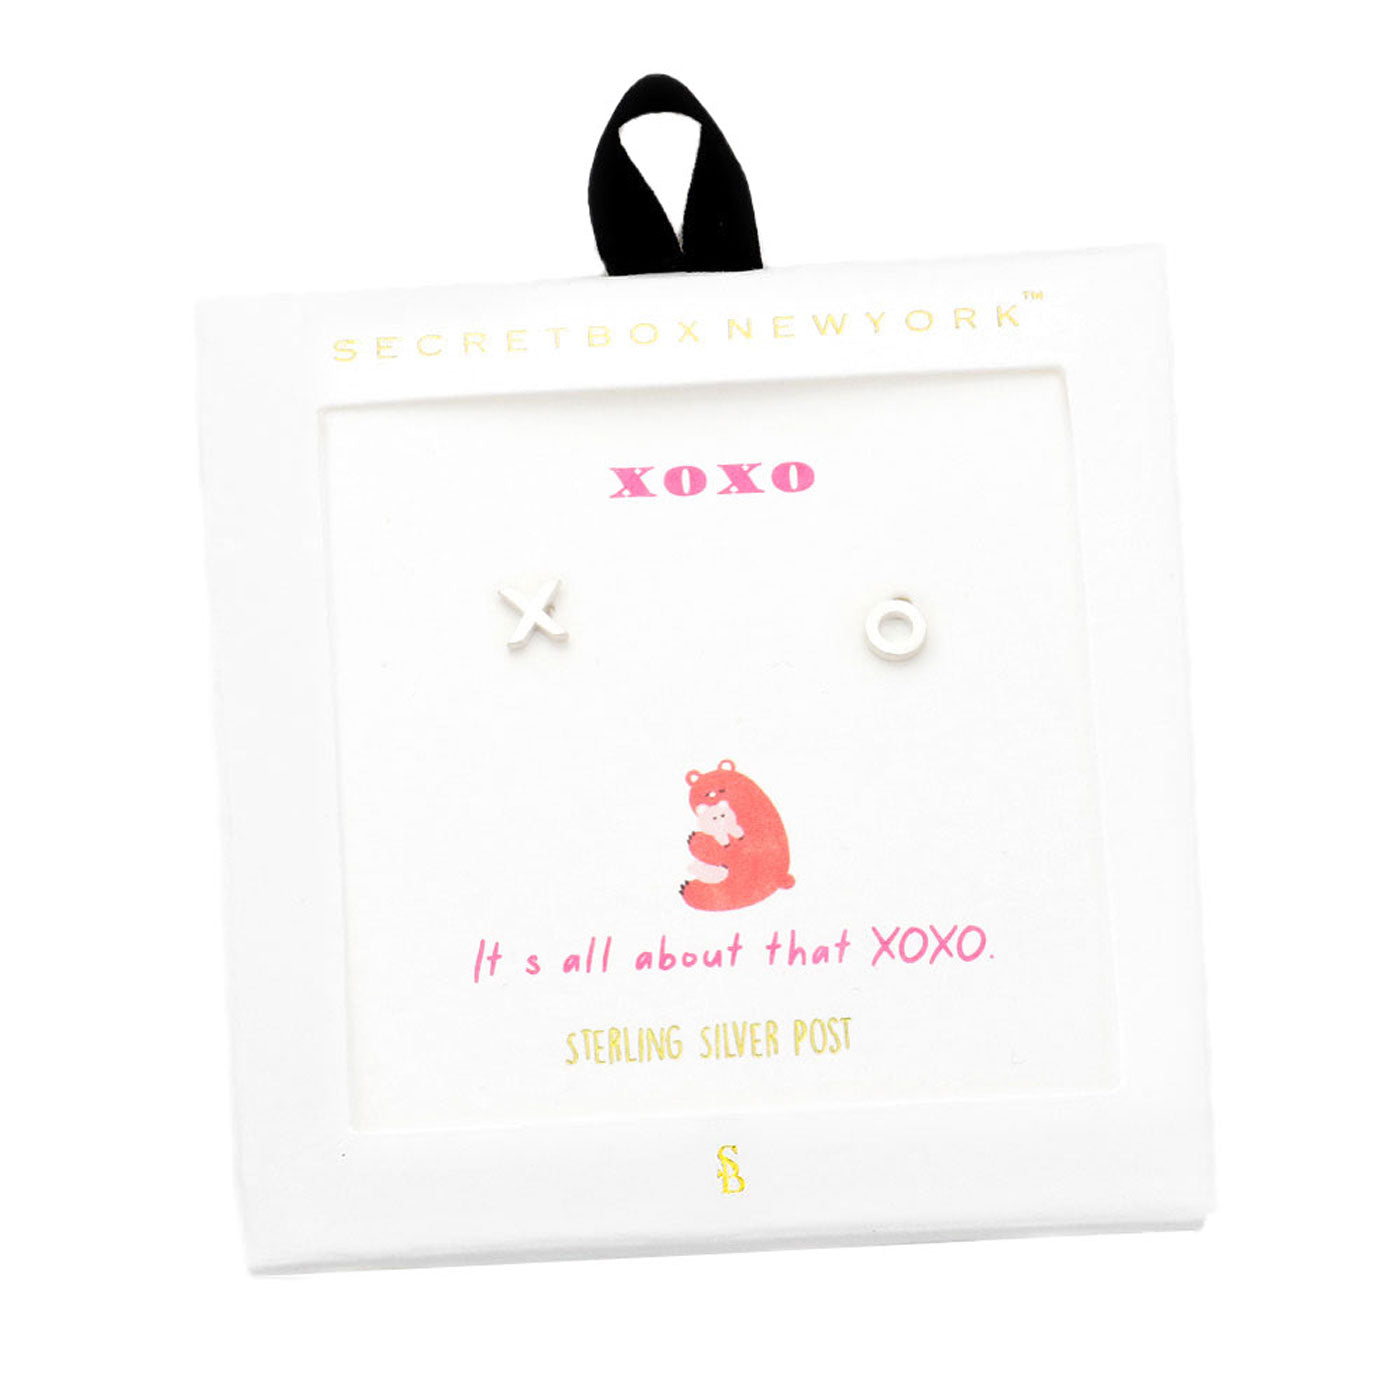 Worn Silver Secret Box Metal XO Message Stud Earrings, put on a pop of color to complete your ensemble. Beautifully crafted design adds a gorgeous glow to any outfit. Perfect for adding just the right amount of shimmer & shine. Perfect for Birthday Gift, Anniversary Gift, Mother's Day Gift, Graduation Gift, Valentine's Day Gift.